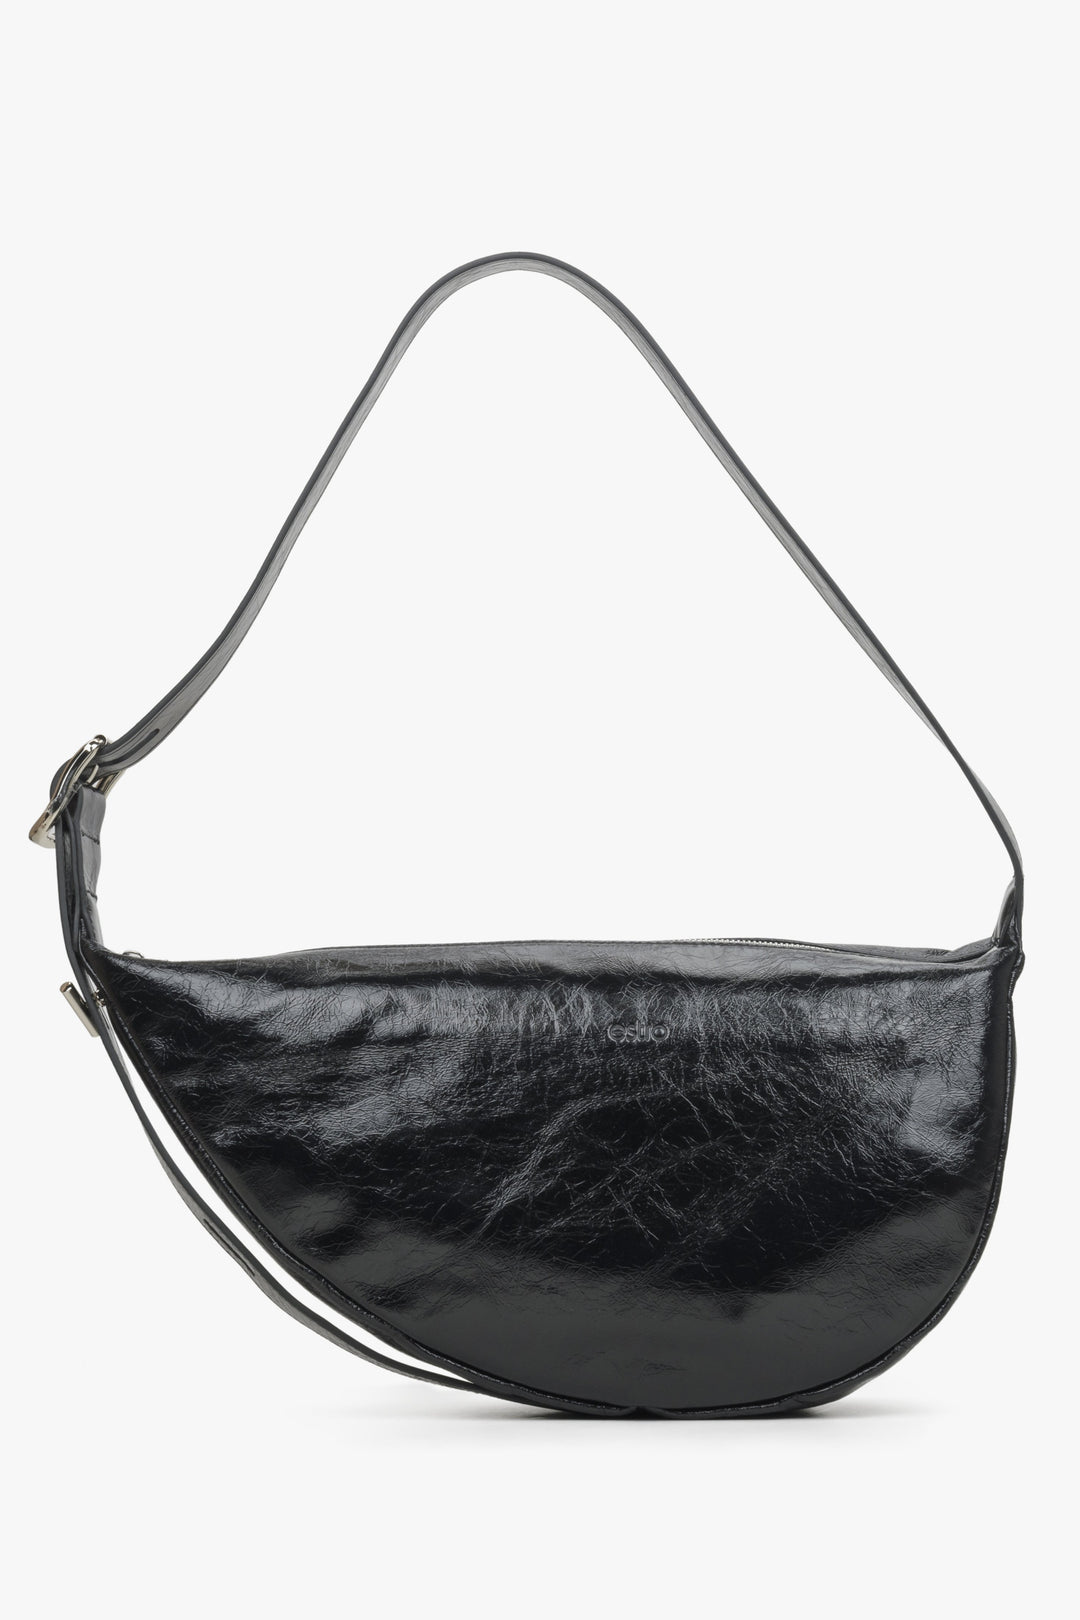 Women's black shoulder bag made of patent leather by Estro.